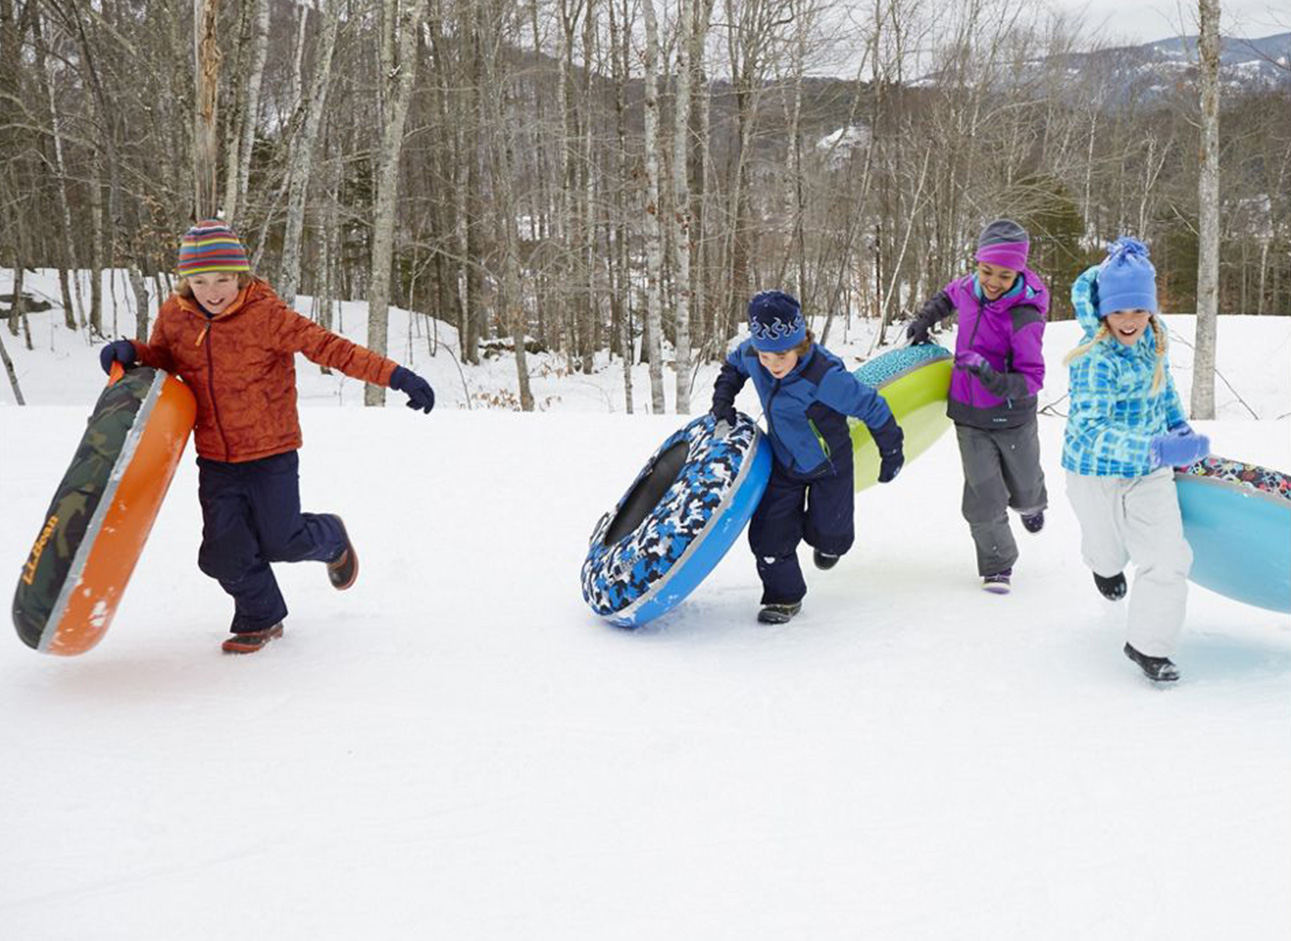 Snow Tube - Experience the thrill of snow tubing and sliding down snowy slopes